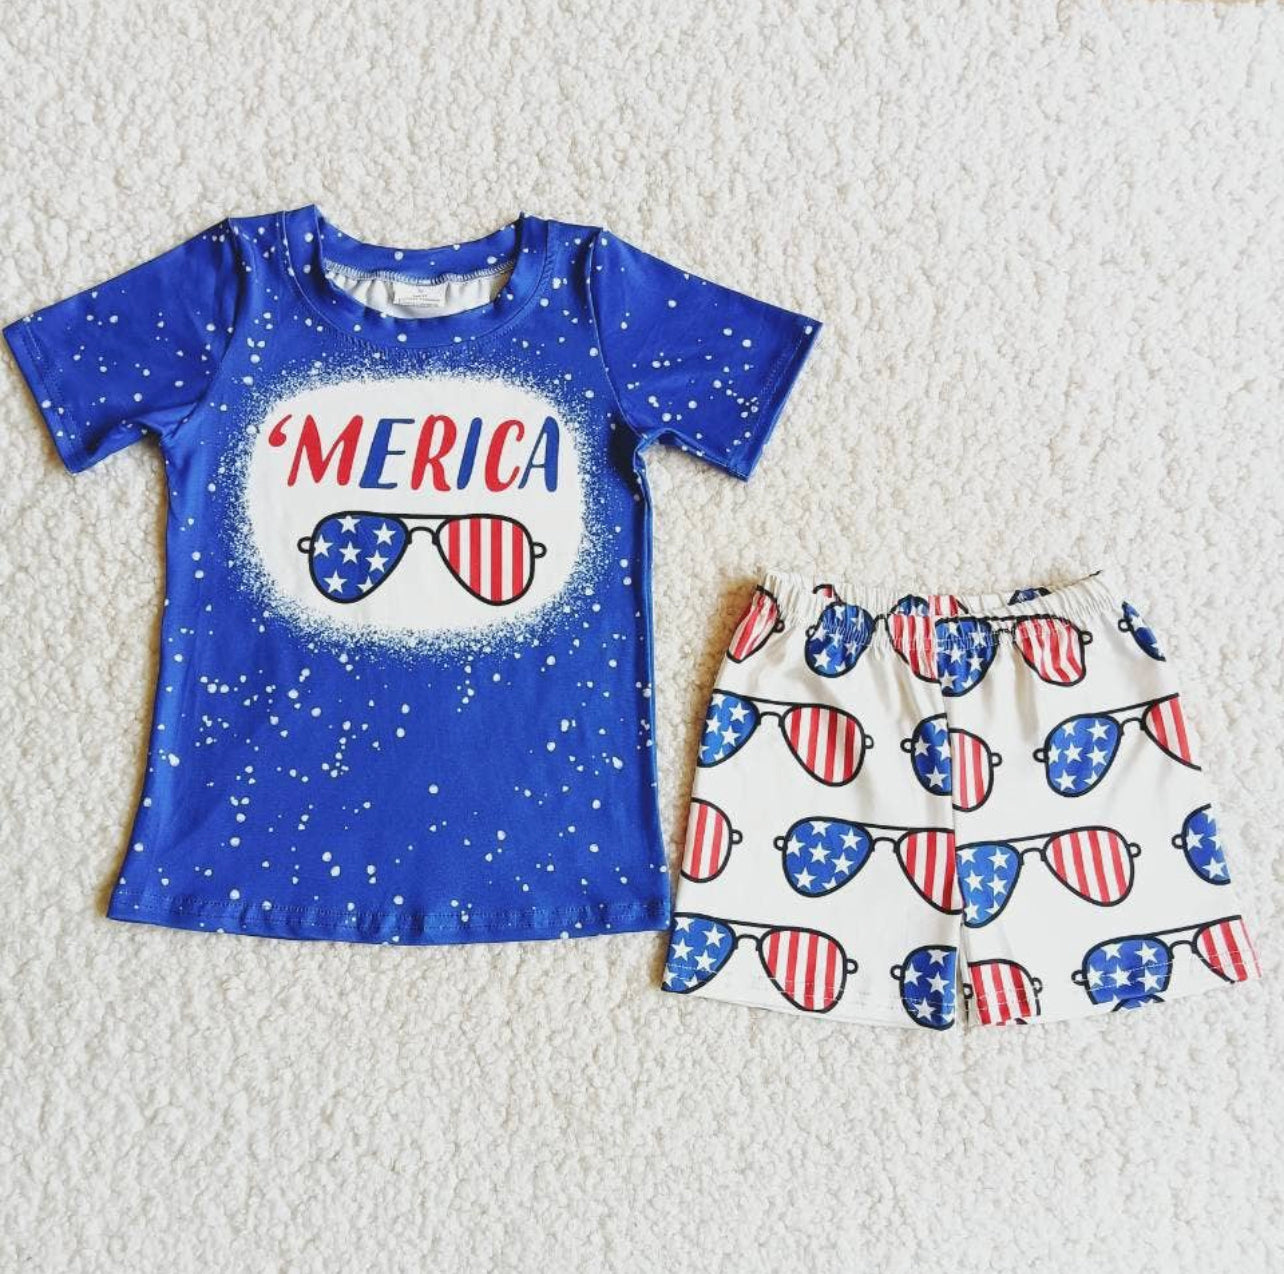 Merica Boy Glasses Shorts Outfit